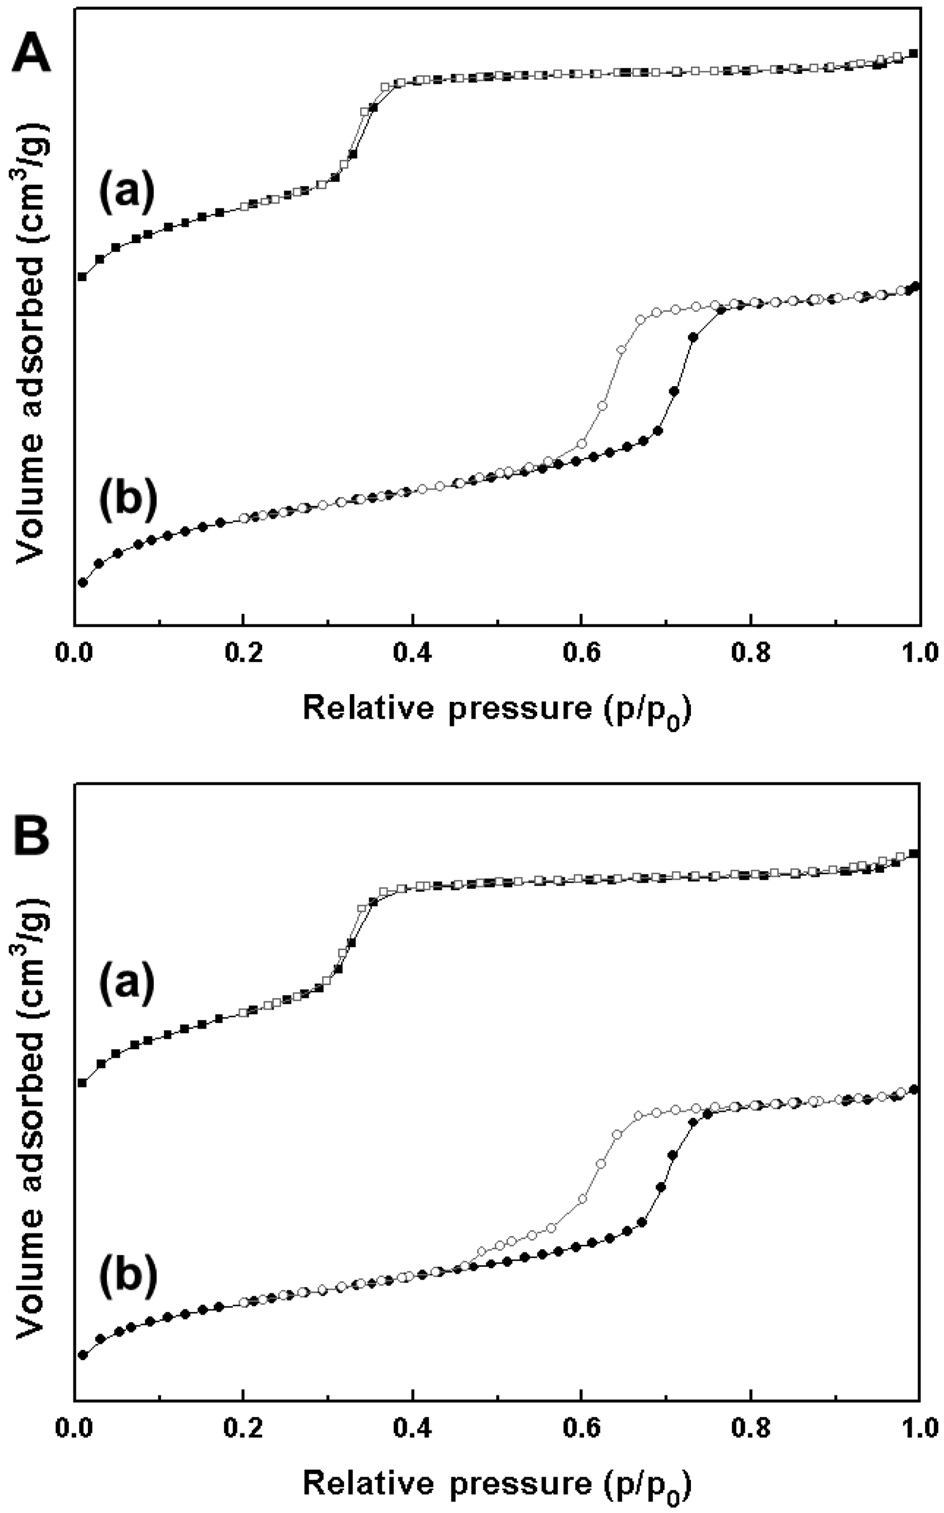 Nitrogen adsorption-desorption isotherms of mesoporous support materials. (A) Original mesoporous supports: (a) MCM-41 and (b) SBA-15; (B) 3 wt% Pd-1 wt% Cu loaded mesoporous supports: (a) Pd-Cu/MCM-41 and (b) Pd-Cu/SBA-15.